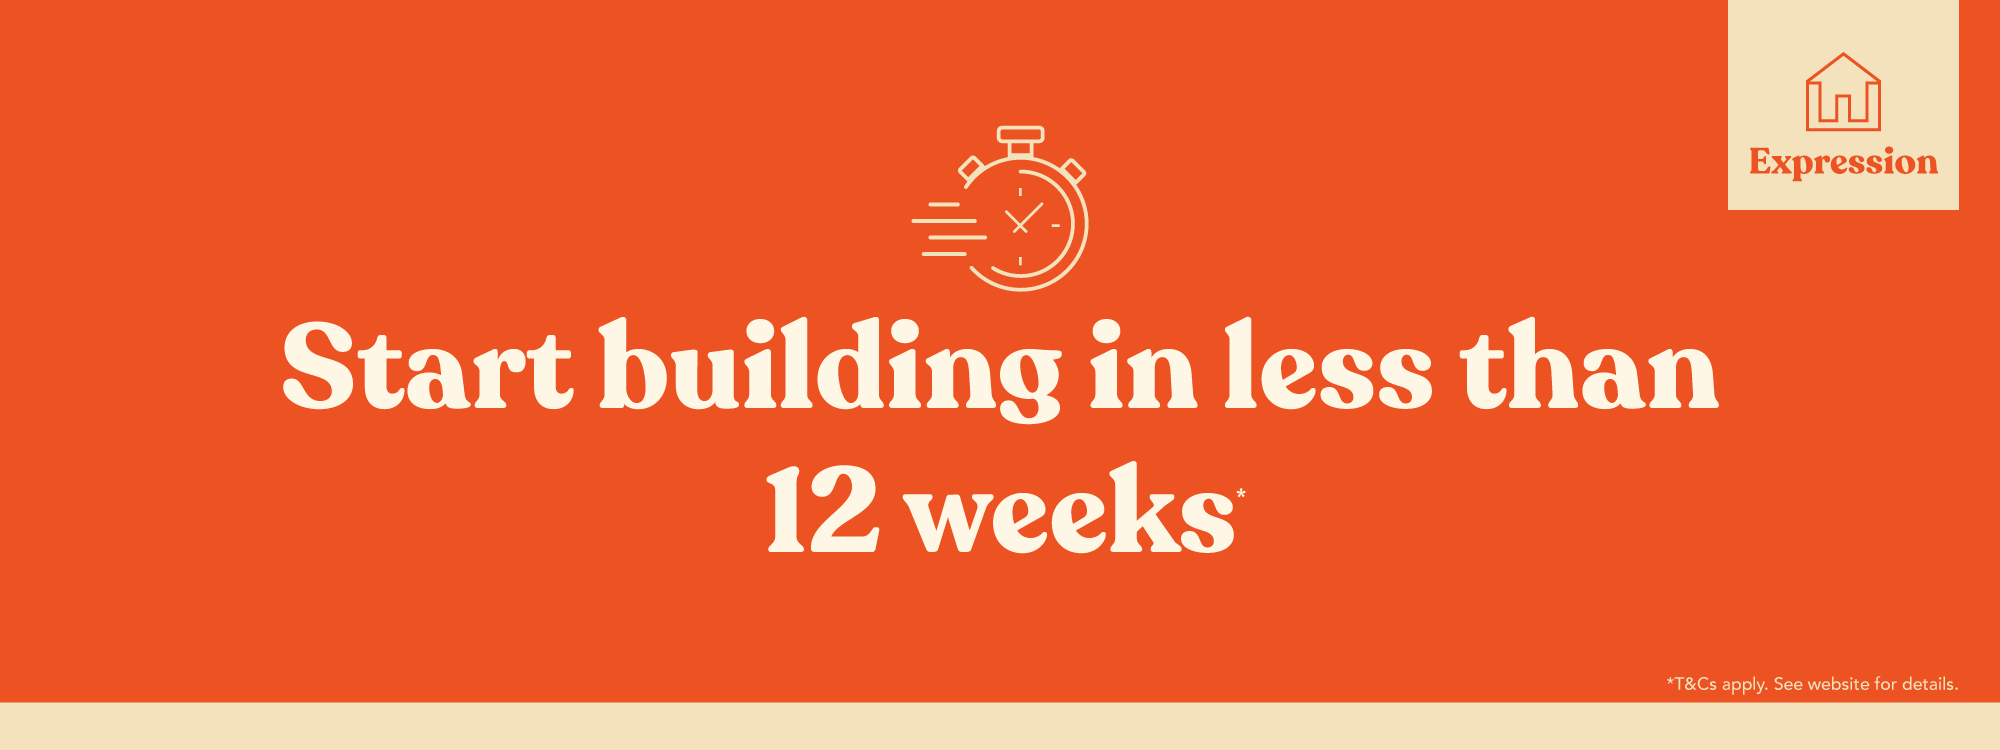 Start-building-in-less-than-12-weeks-1